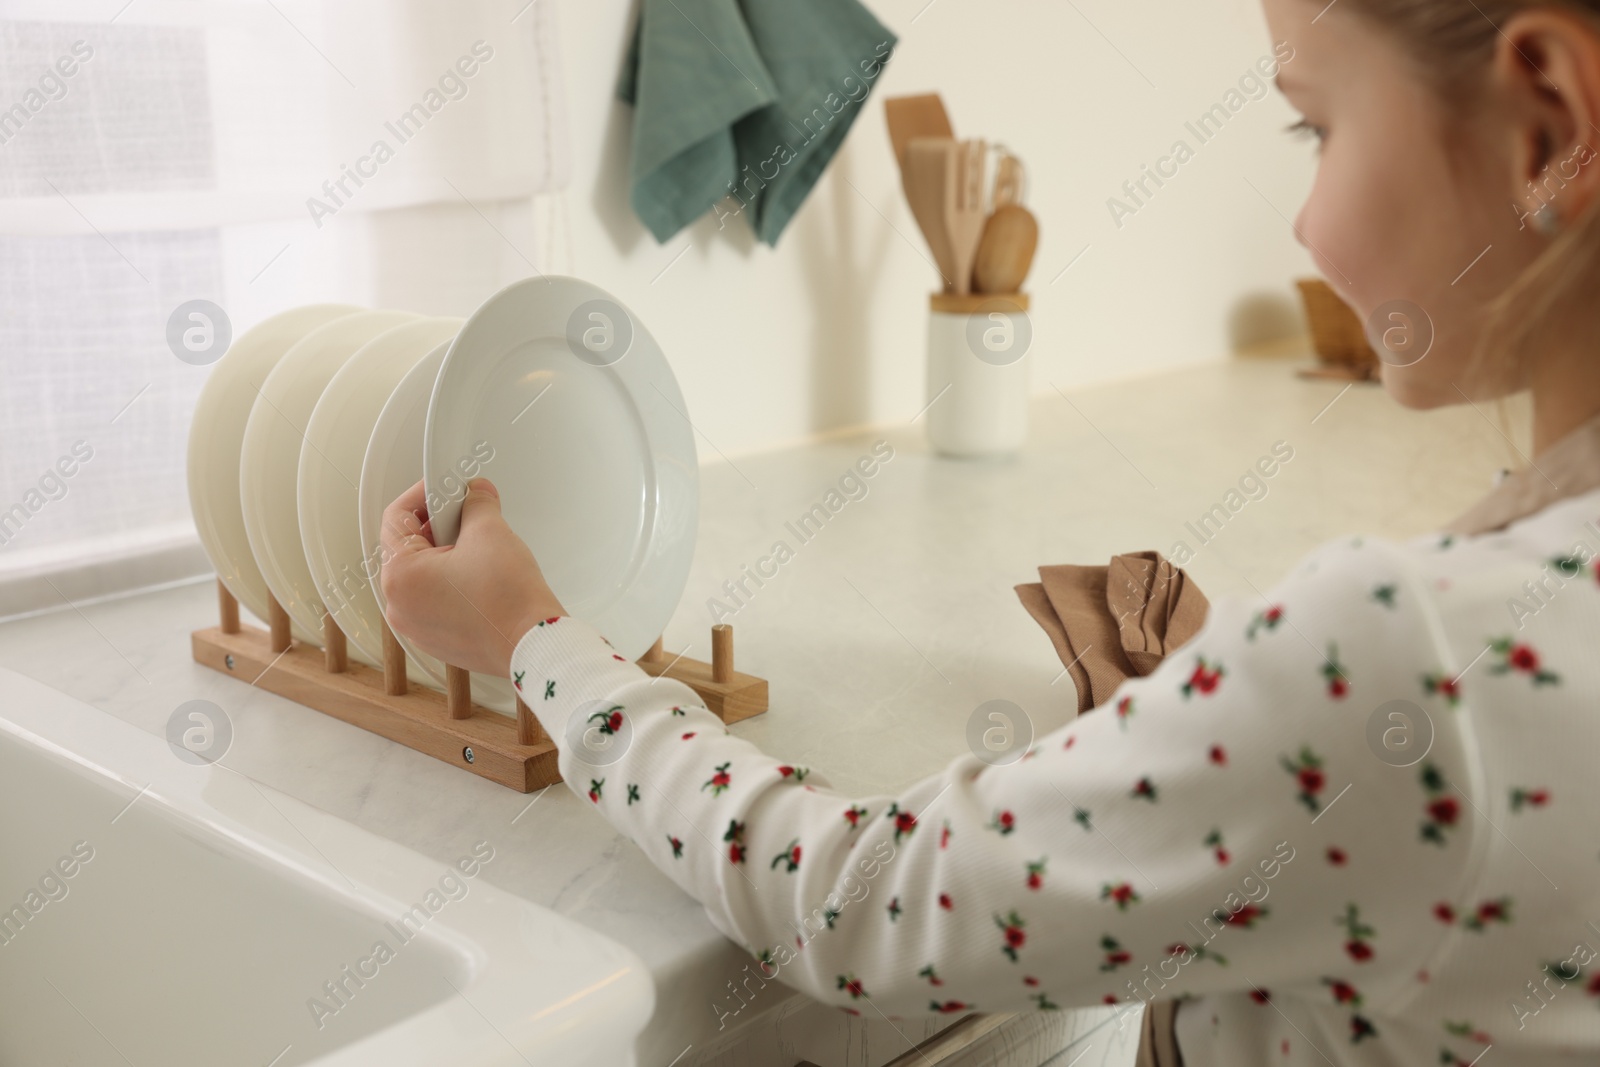 Photo of Girl putting clean plate on drying rack in kitchen, closeup